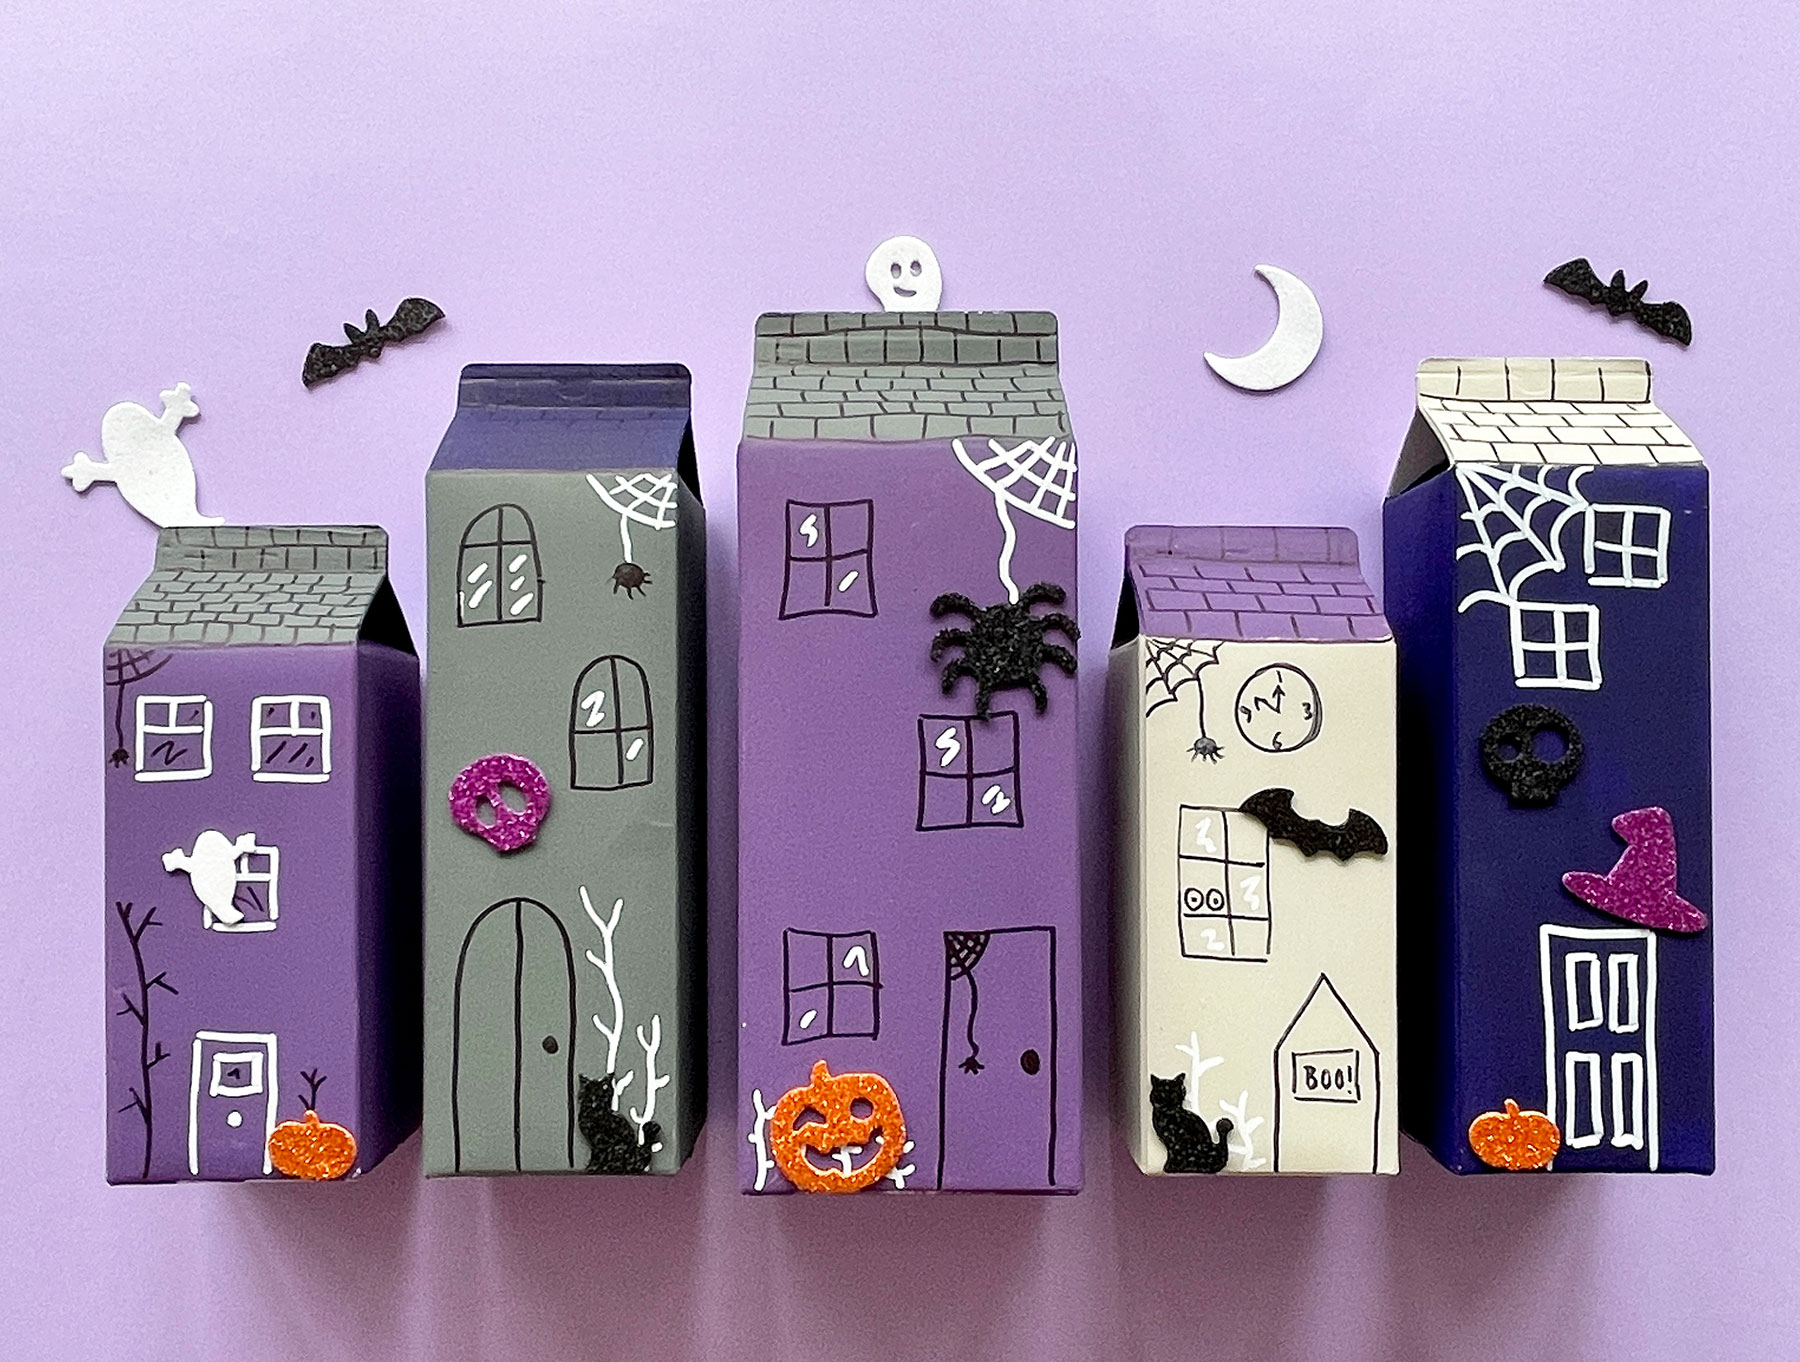 A photo of a DIY haunted village made out of empty juice cartons on a light purple background